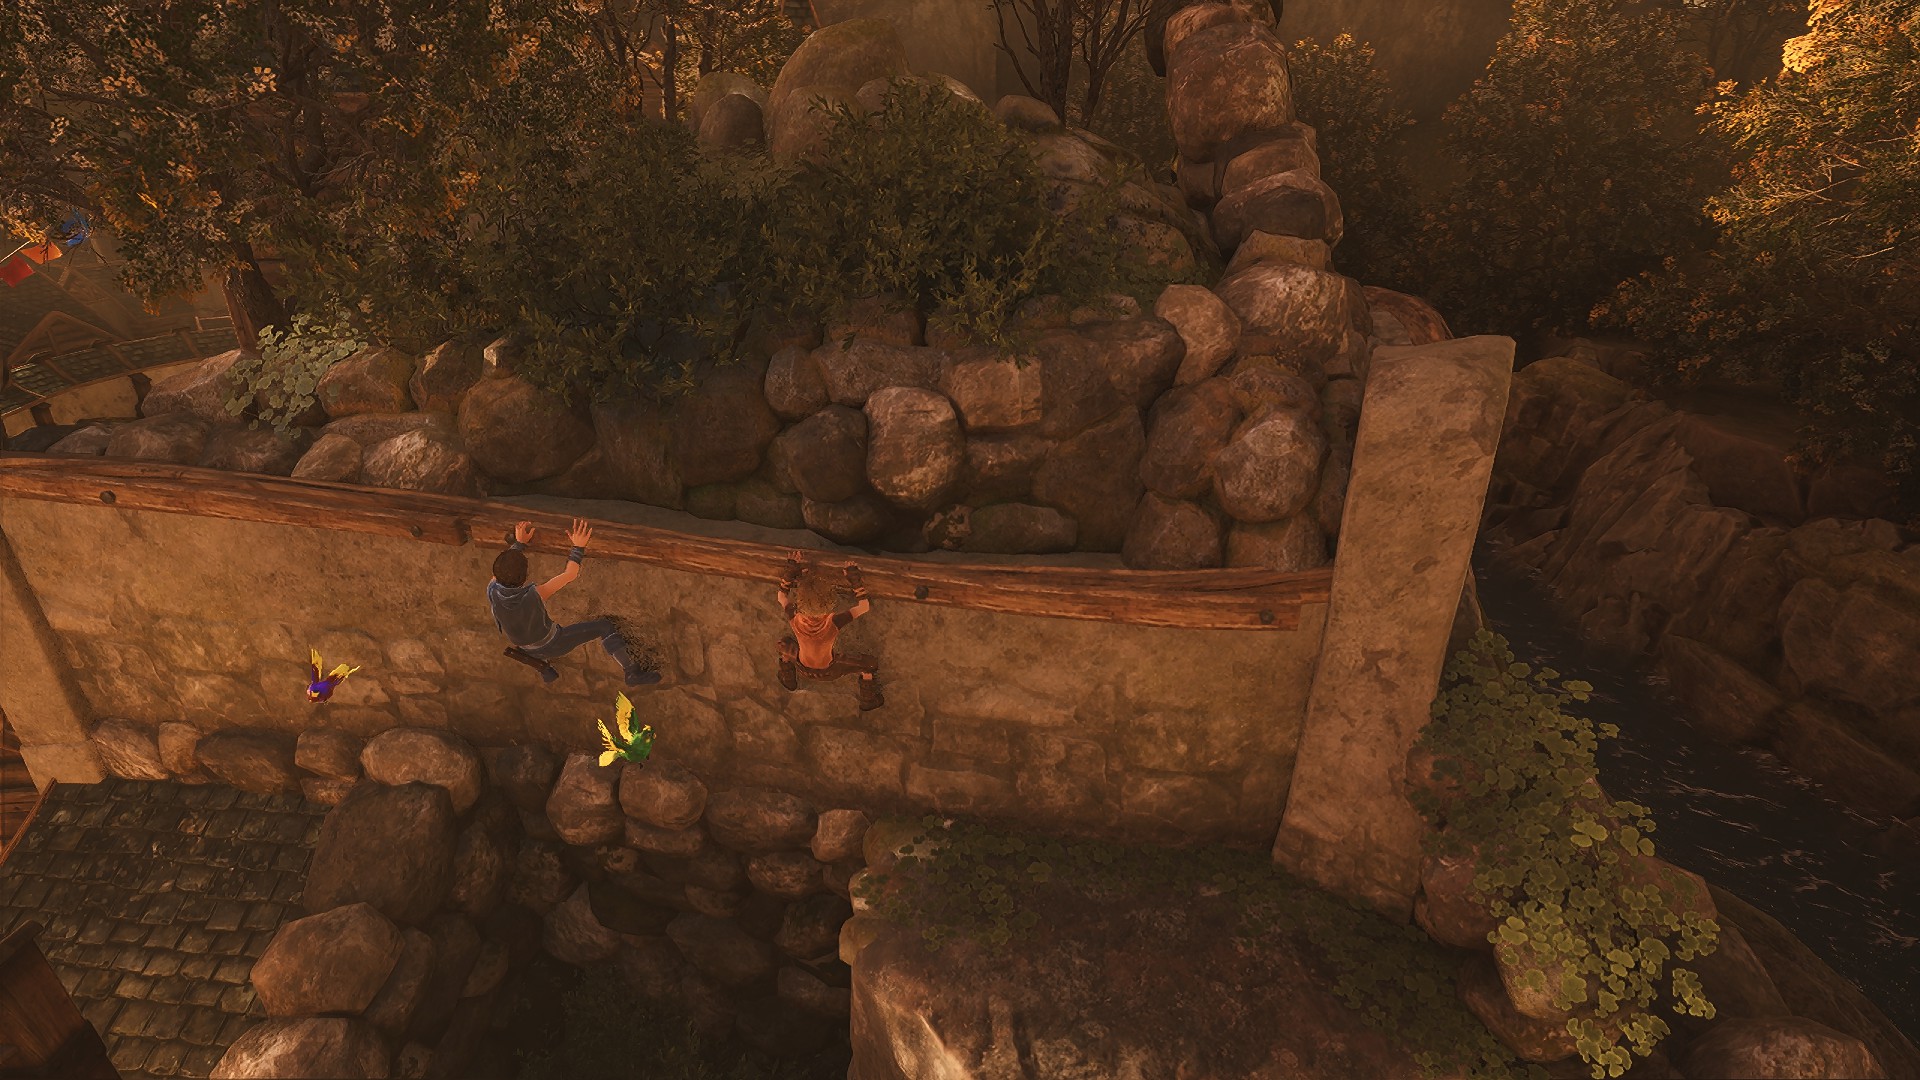 The brothers climbing along a ledge in Brothers: A Tale of Two Sons Remake.